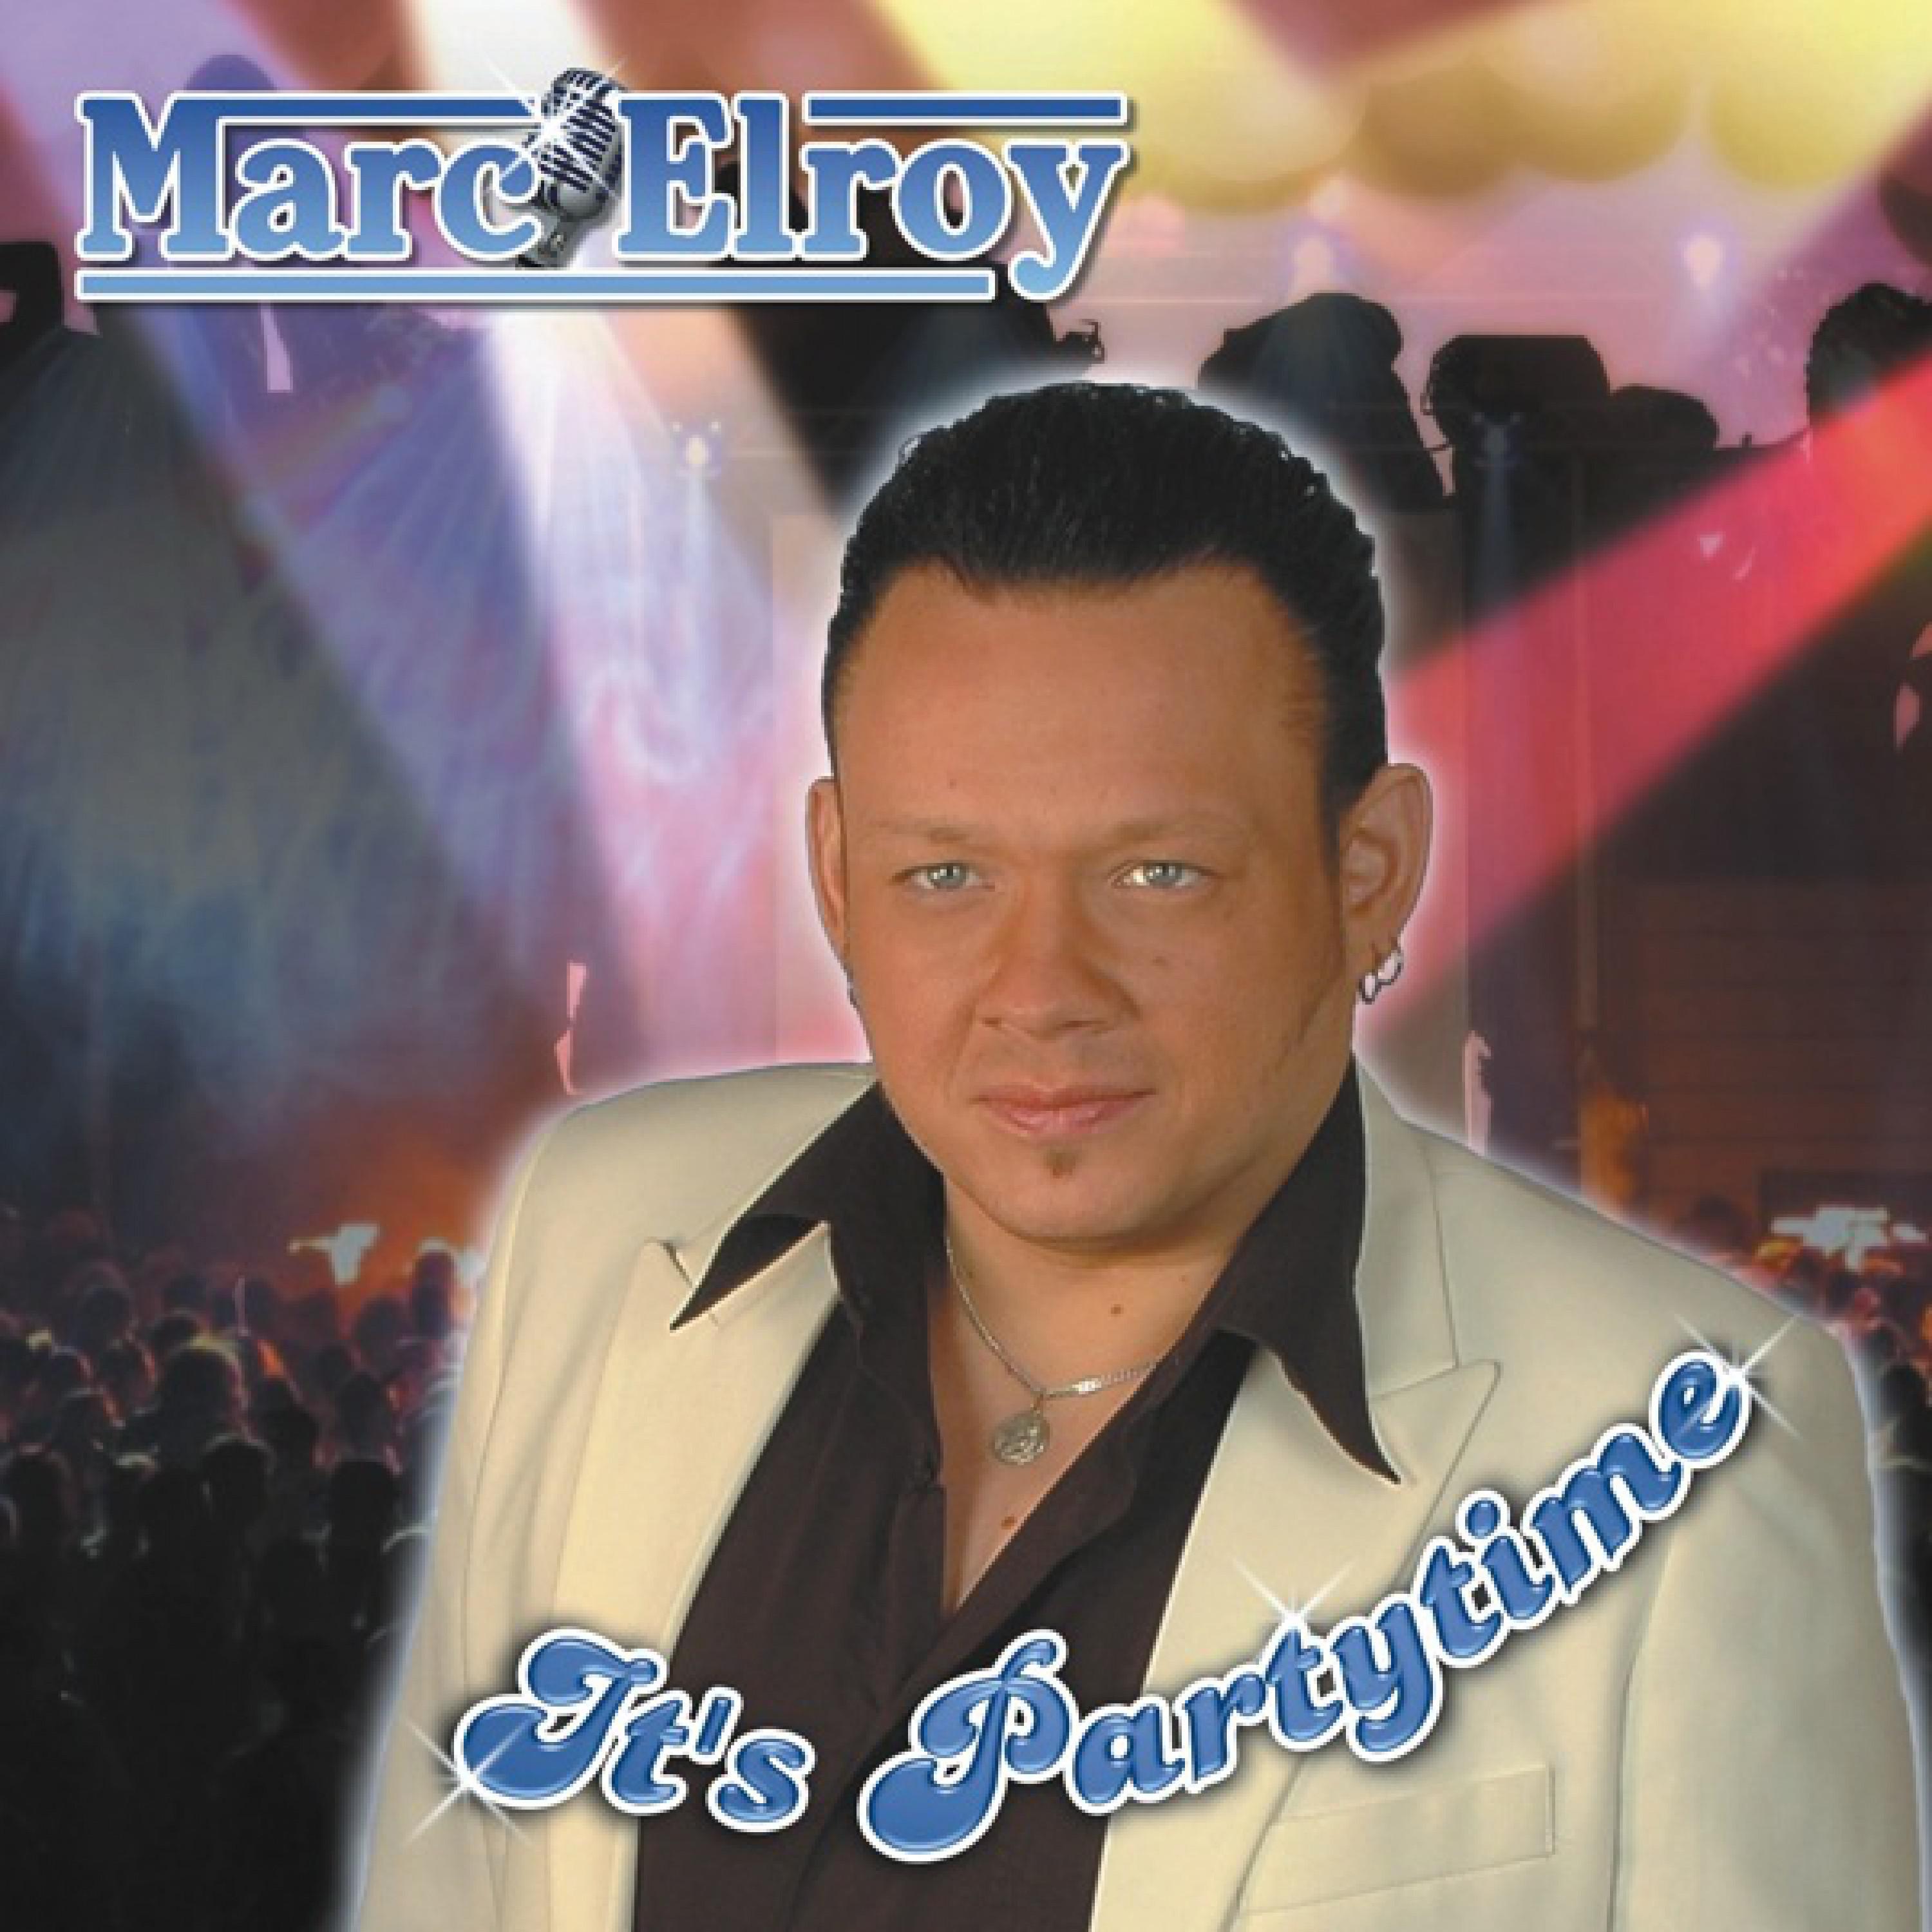 Marc Elroy - We All Wanna Stay (WM Partysong 2010)